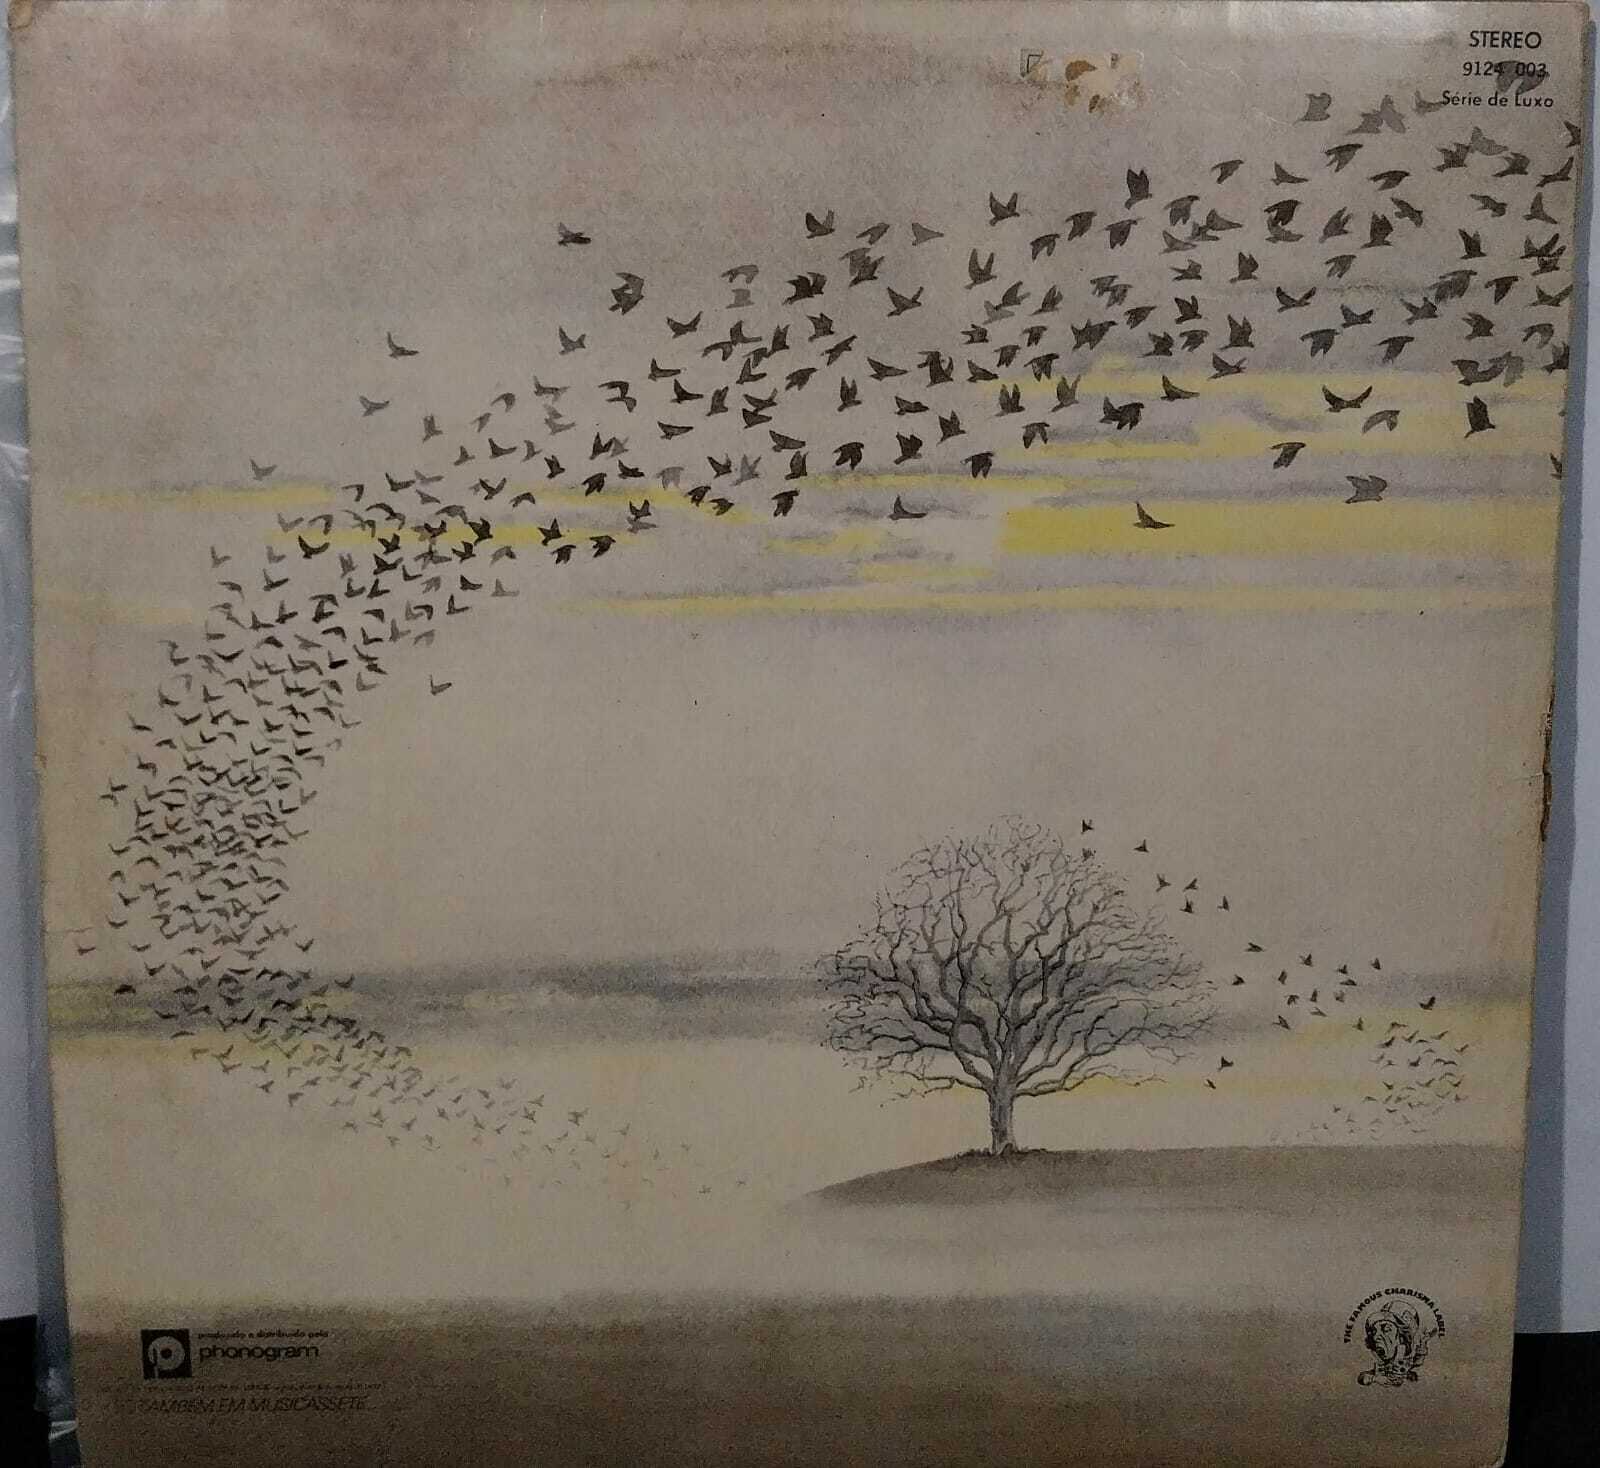 Vinil - Genesis - Wind and Wuthering